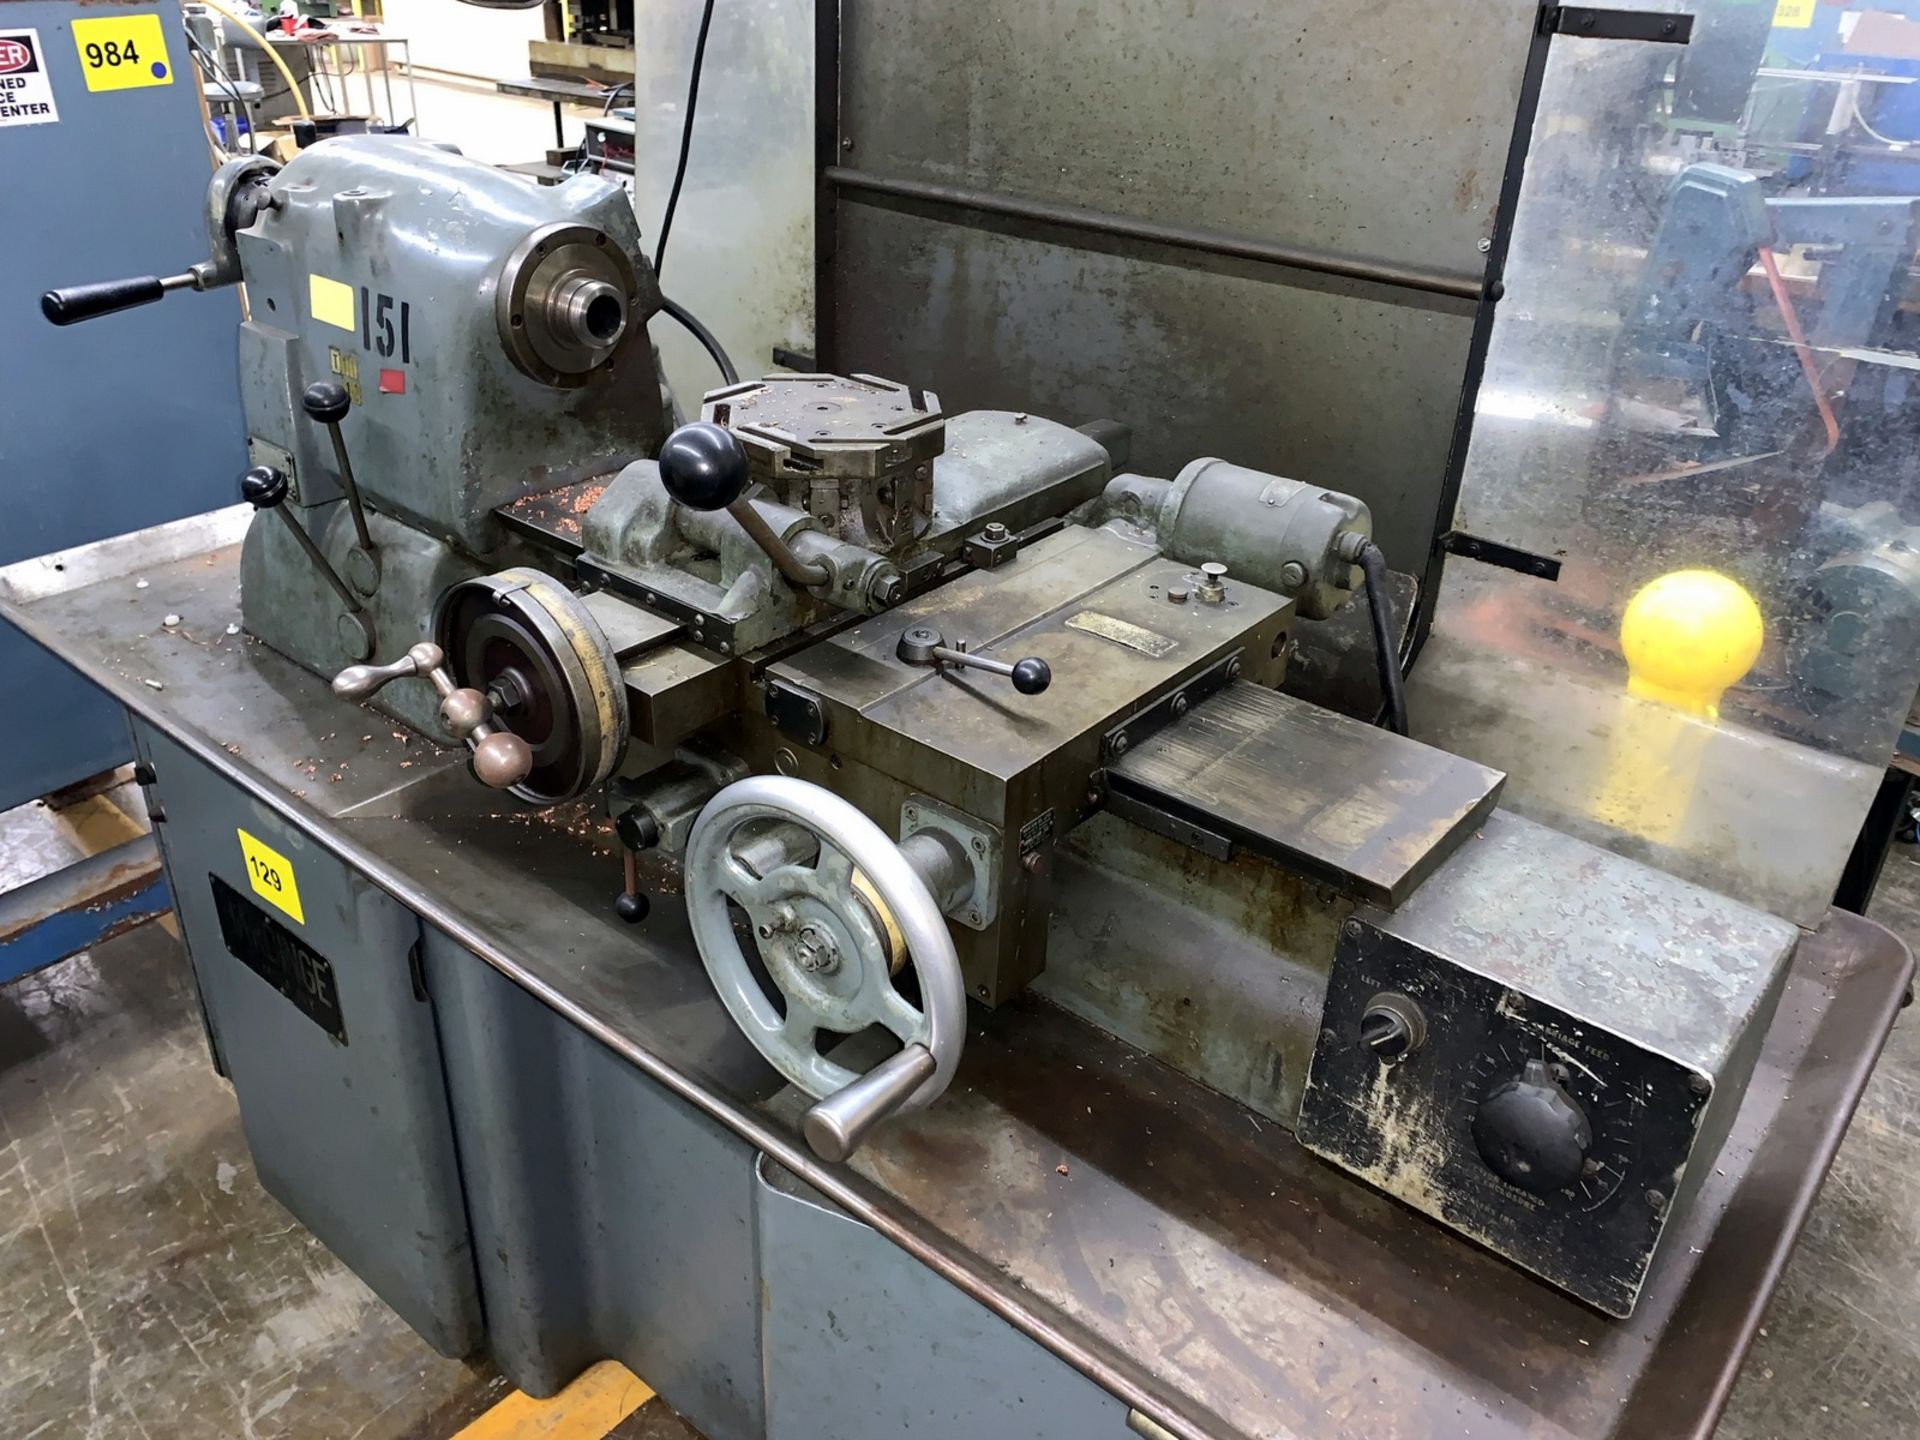 Hardinge Mdl. HCR Precision Lathe, 12" Diameter Swing, 34" Dovetail Bed, Carriage with Turret, - Image 3 of 6